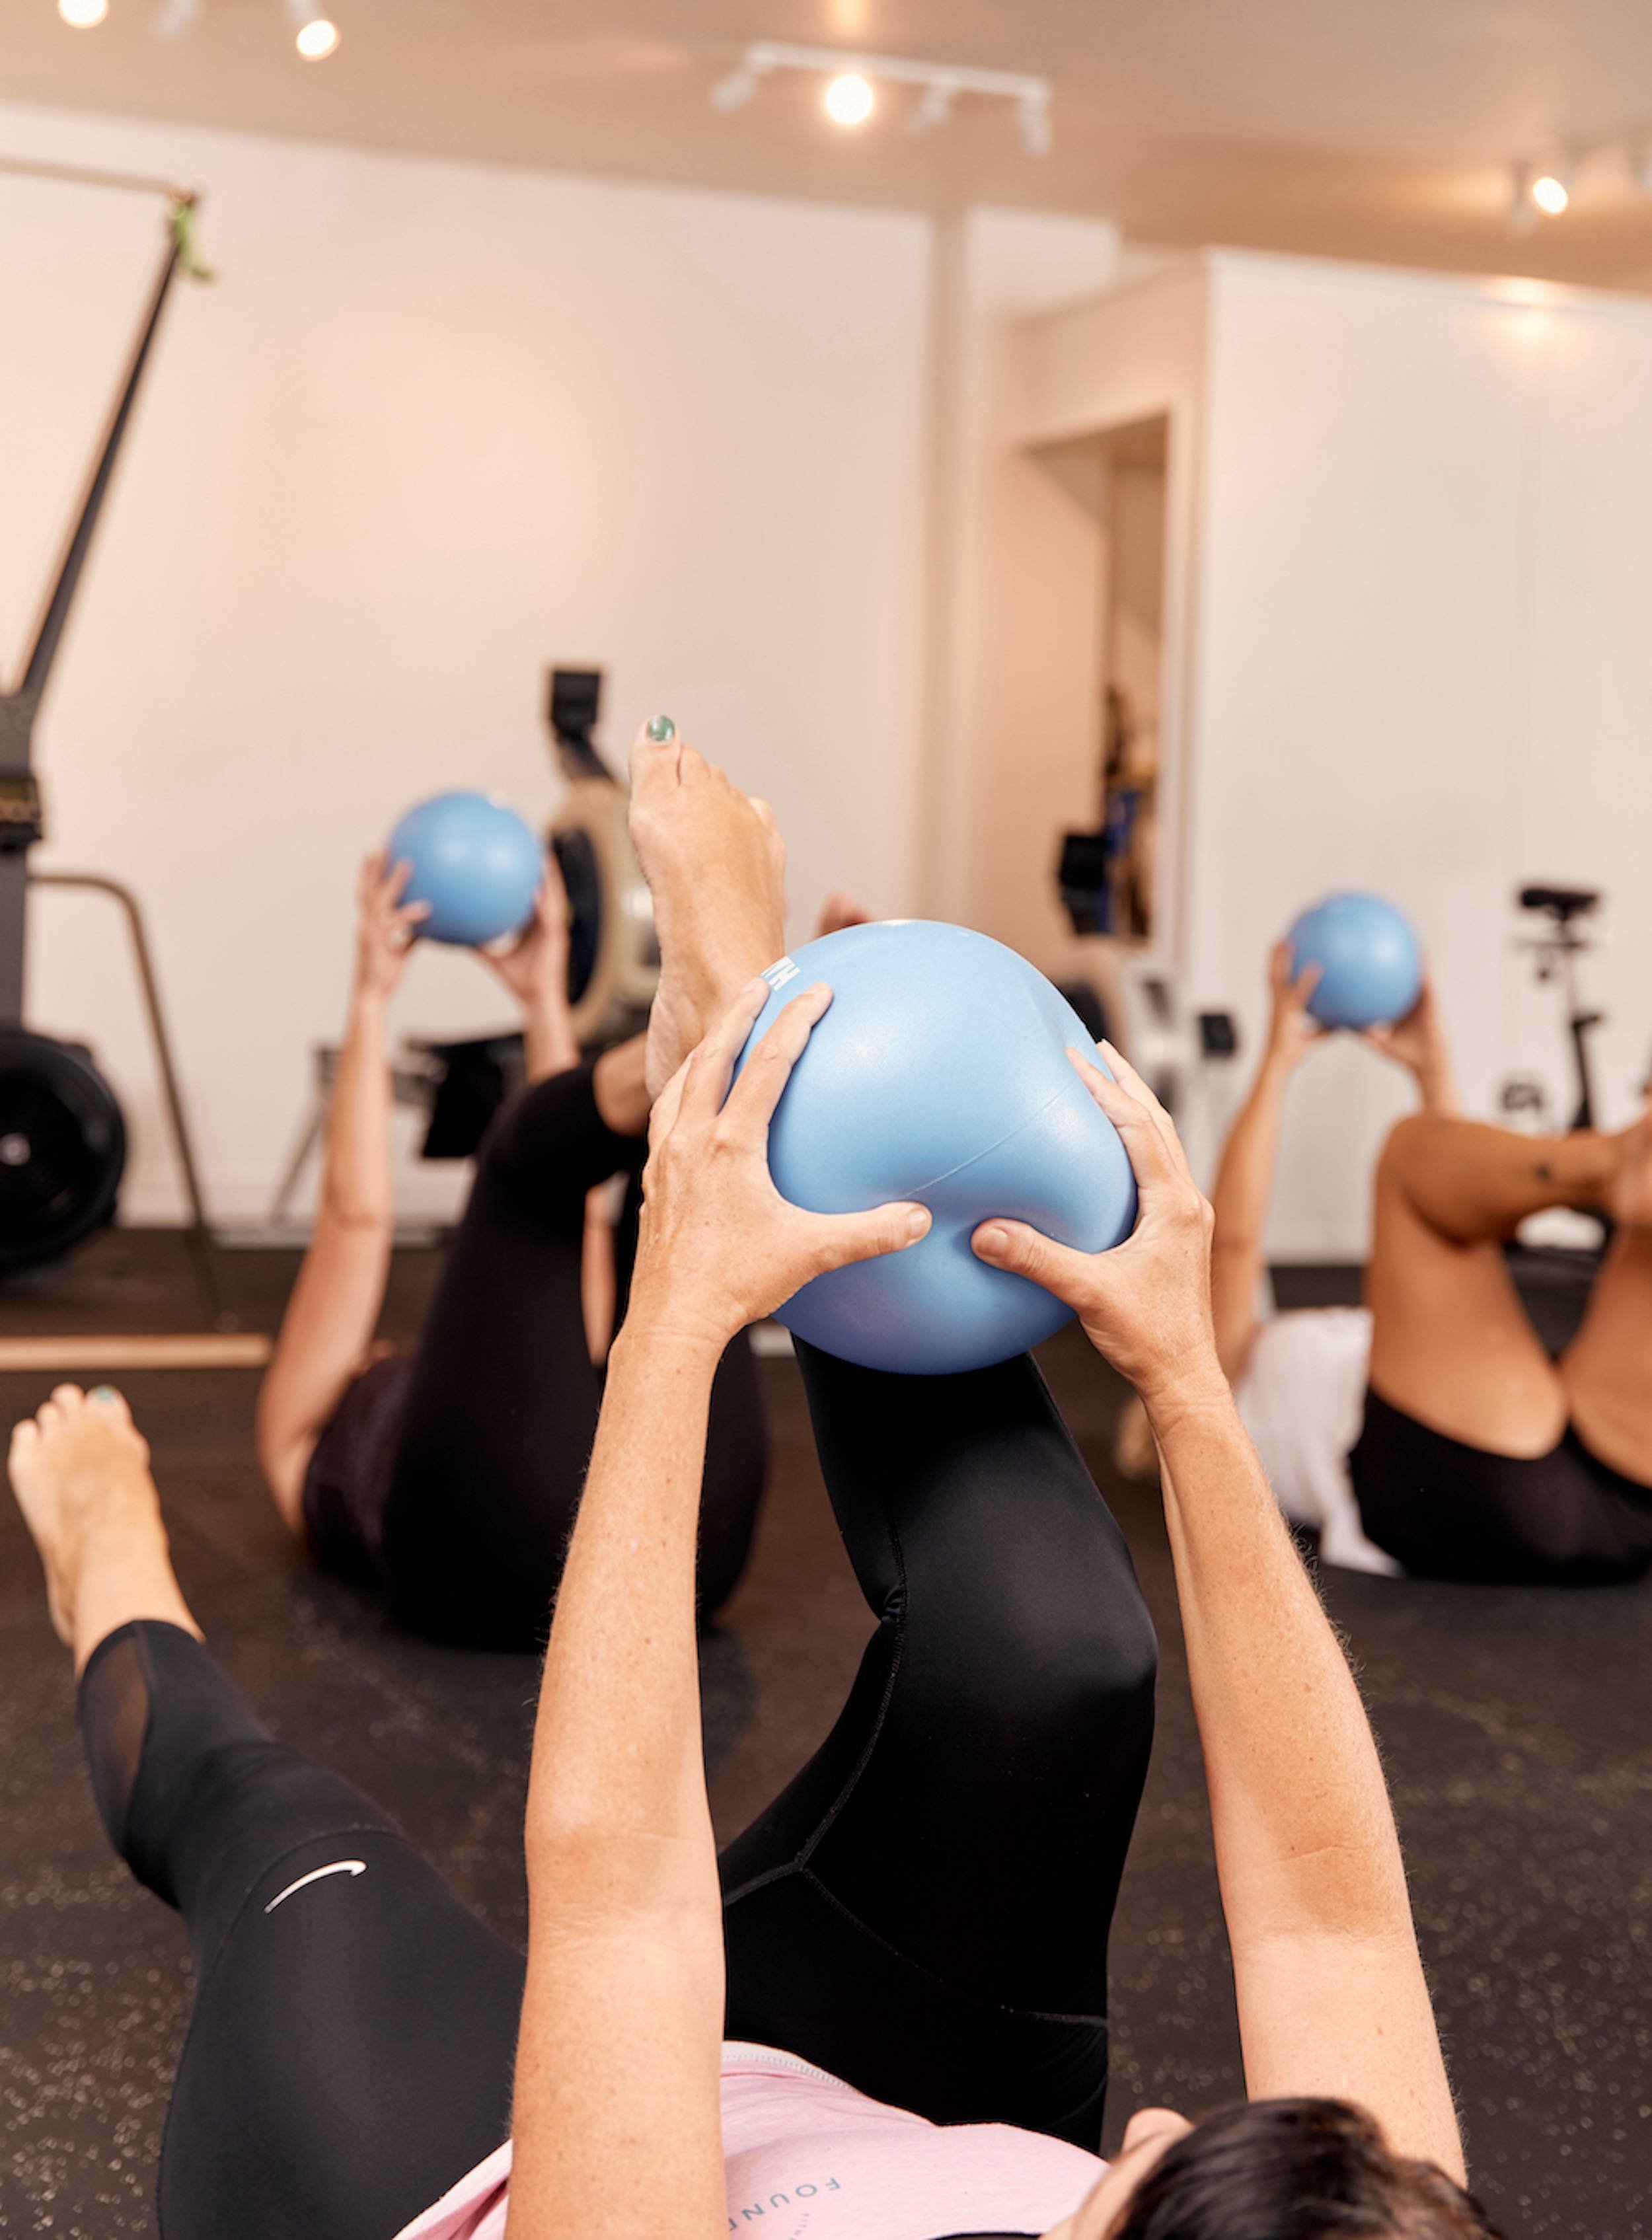 Join our mat pilates classes — Fitness, Wellbeing, Classes